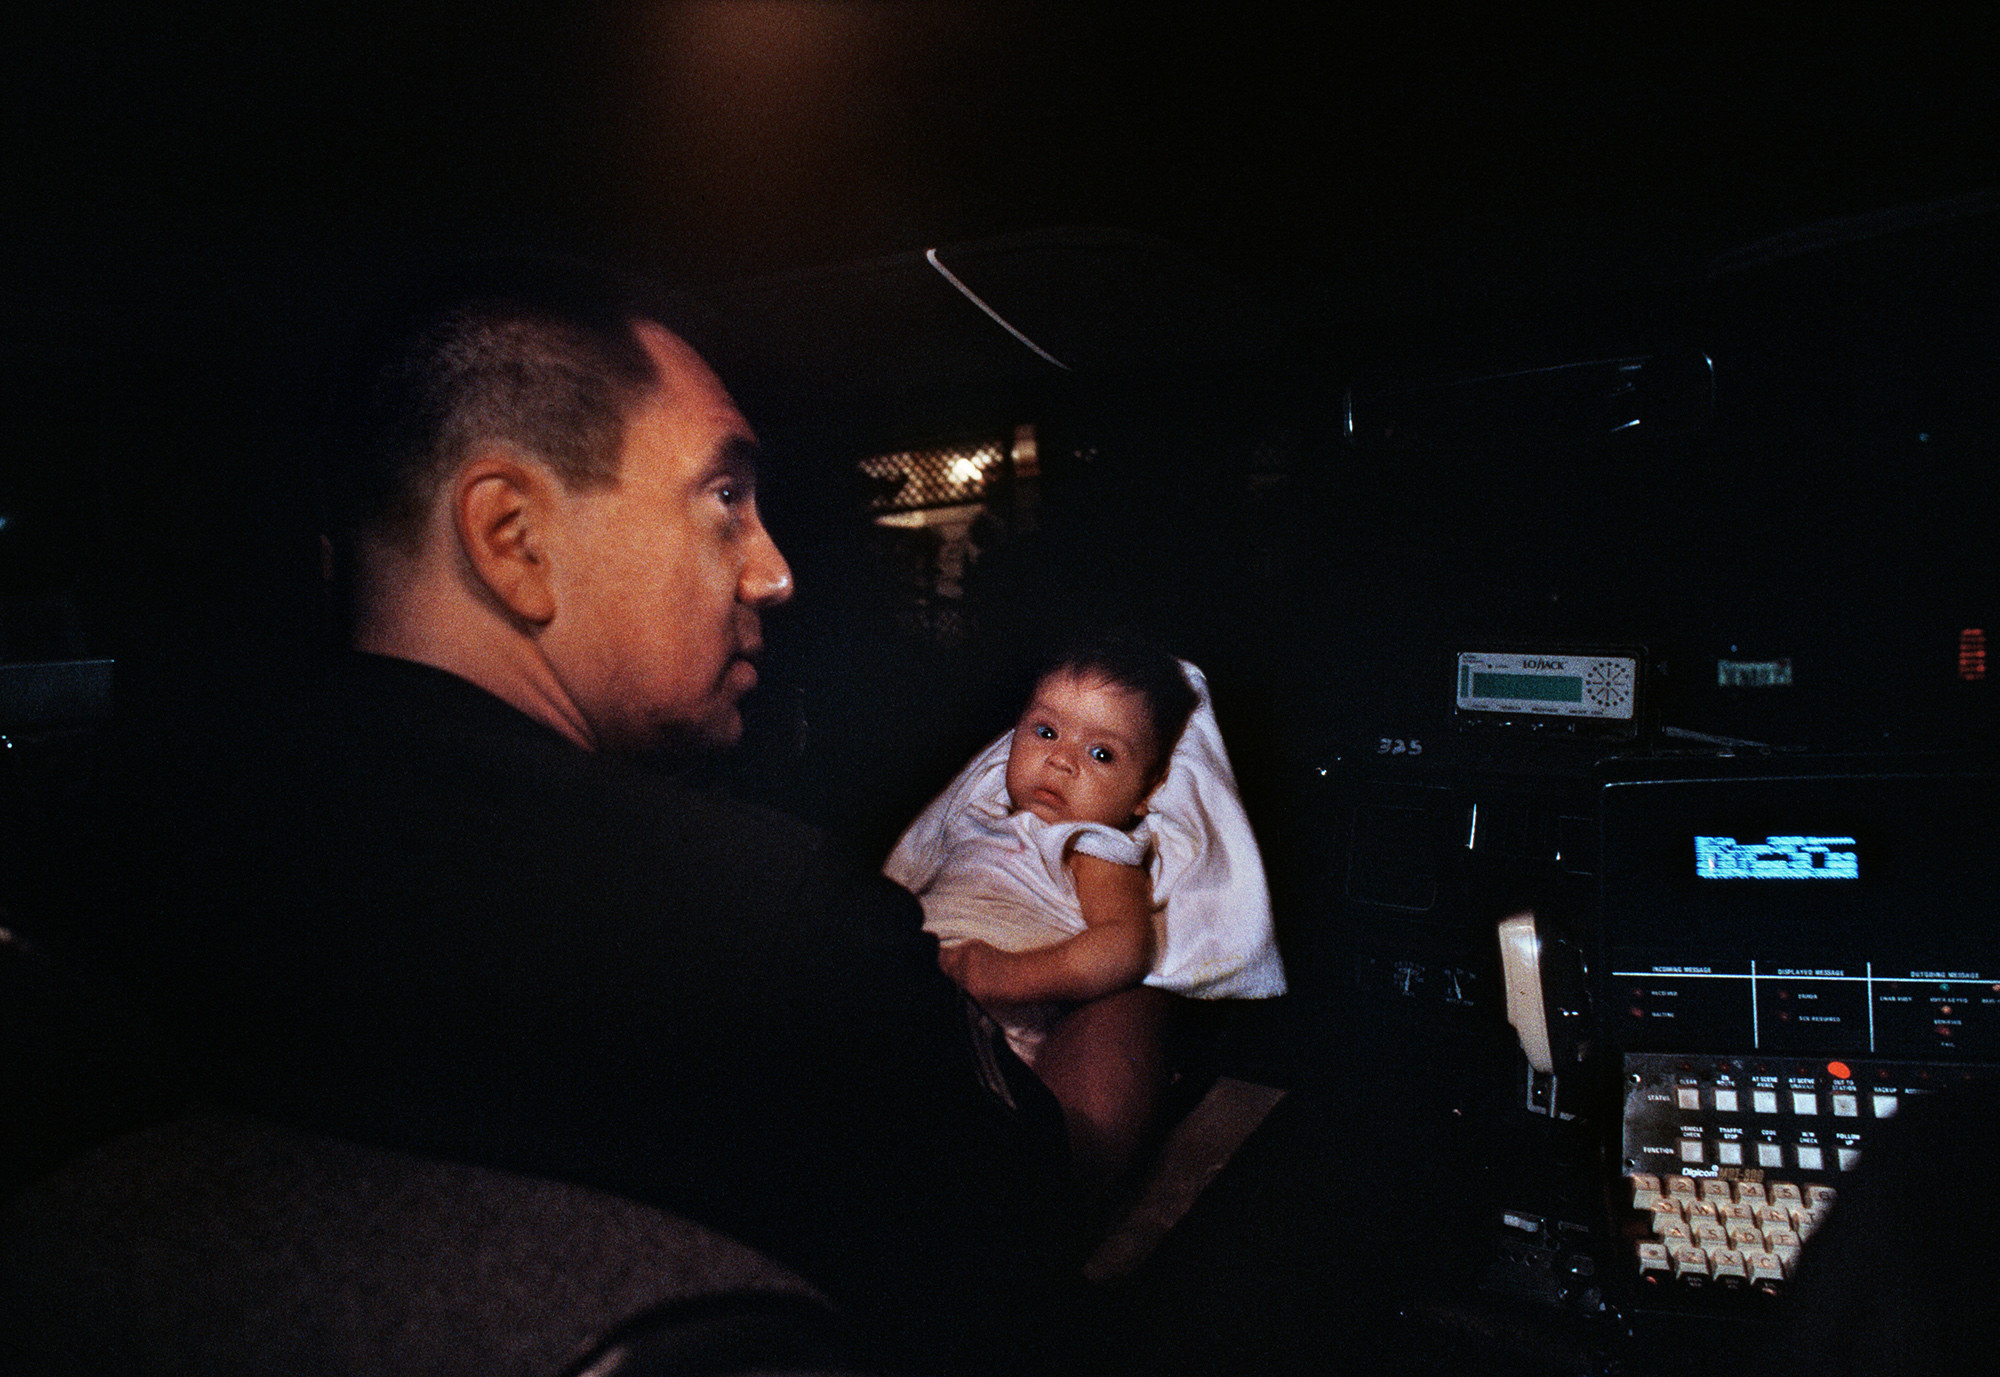 A cop holds a baby in a car at night